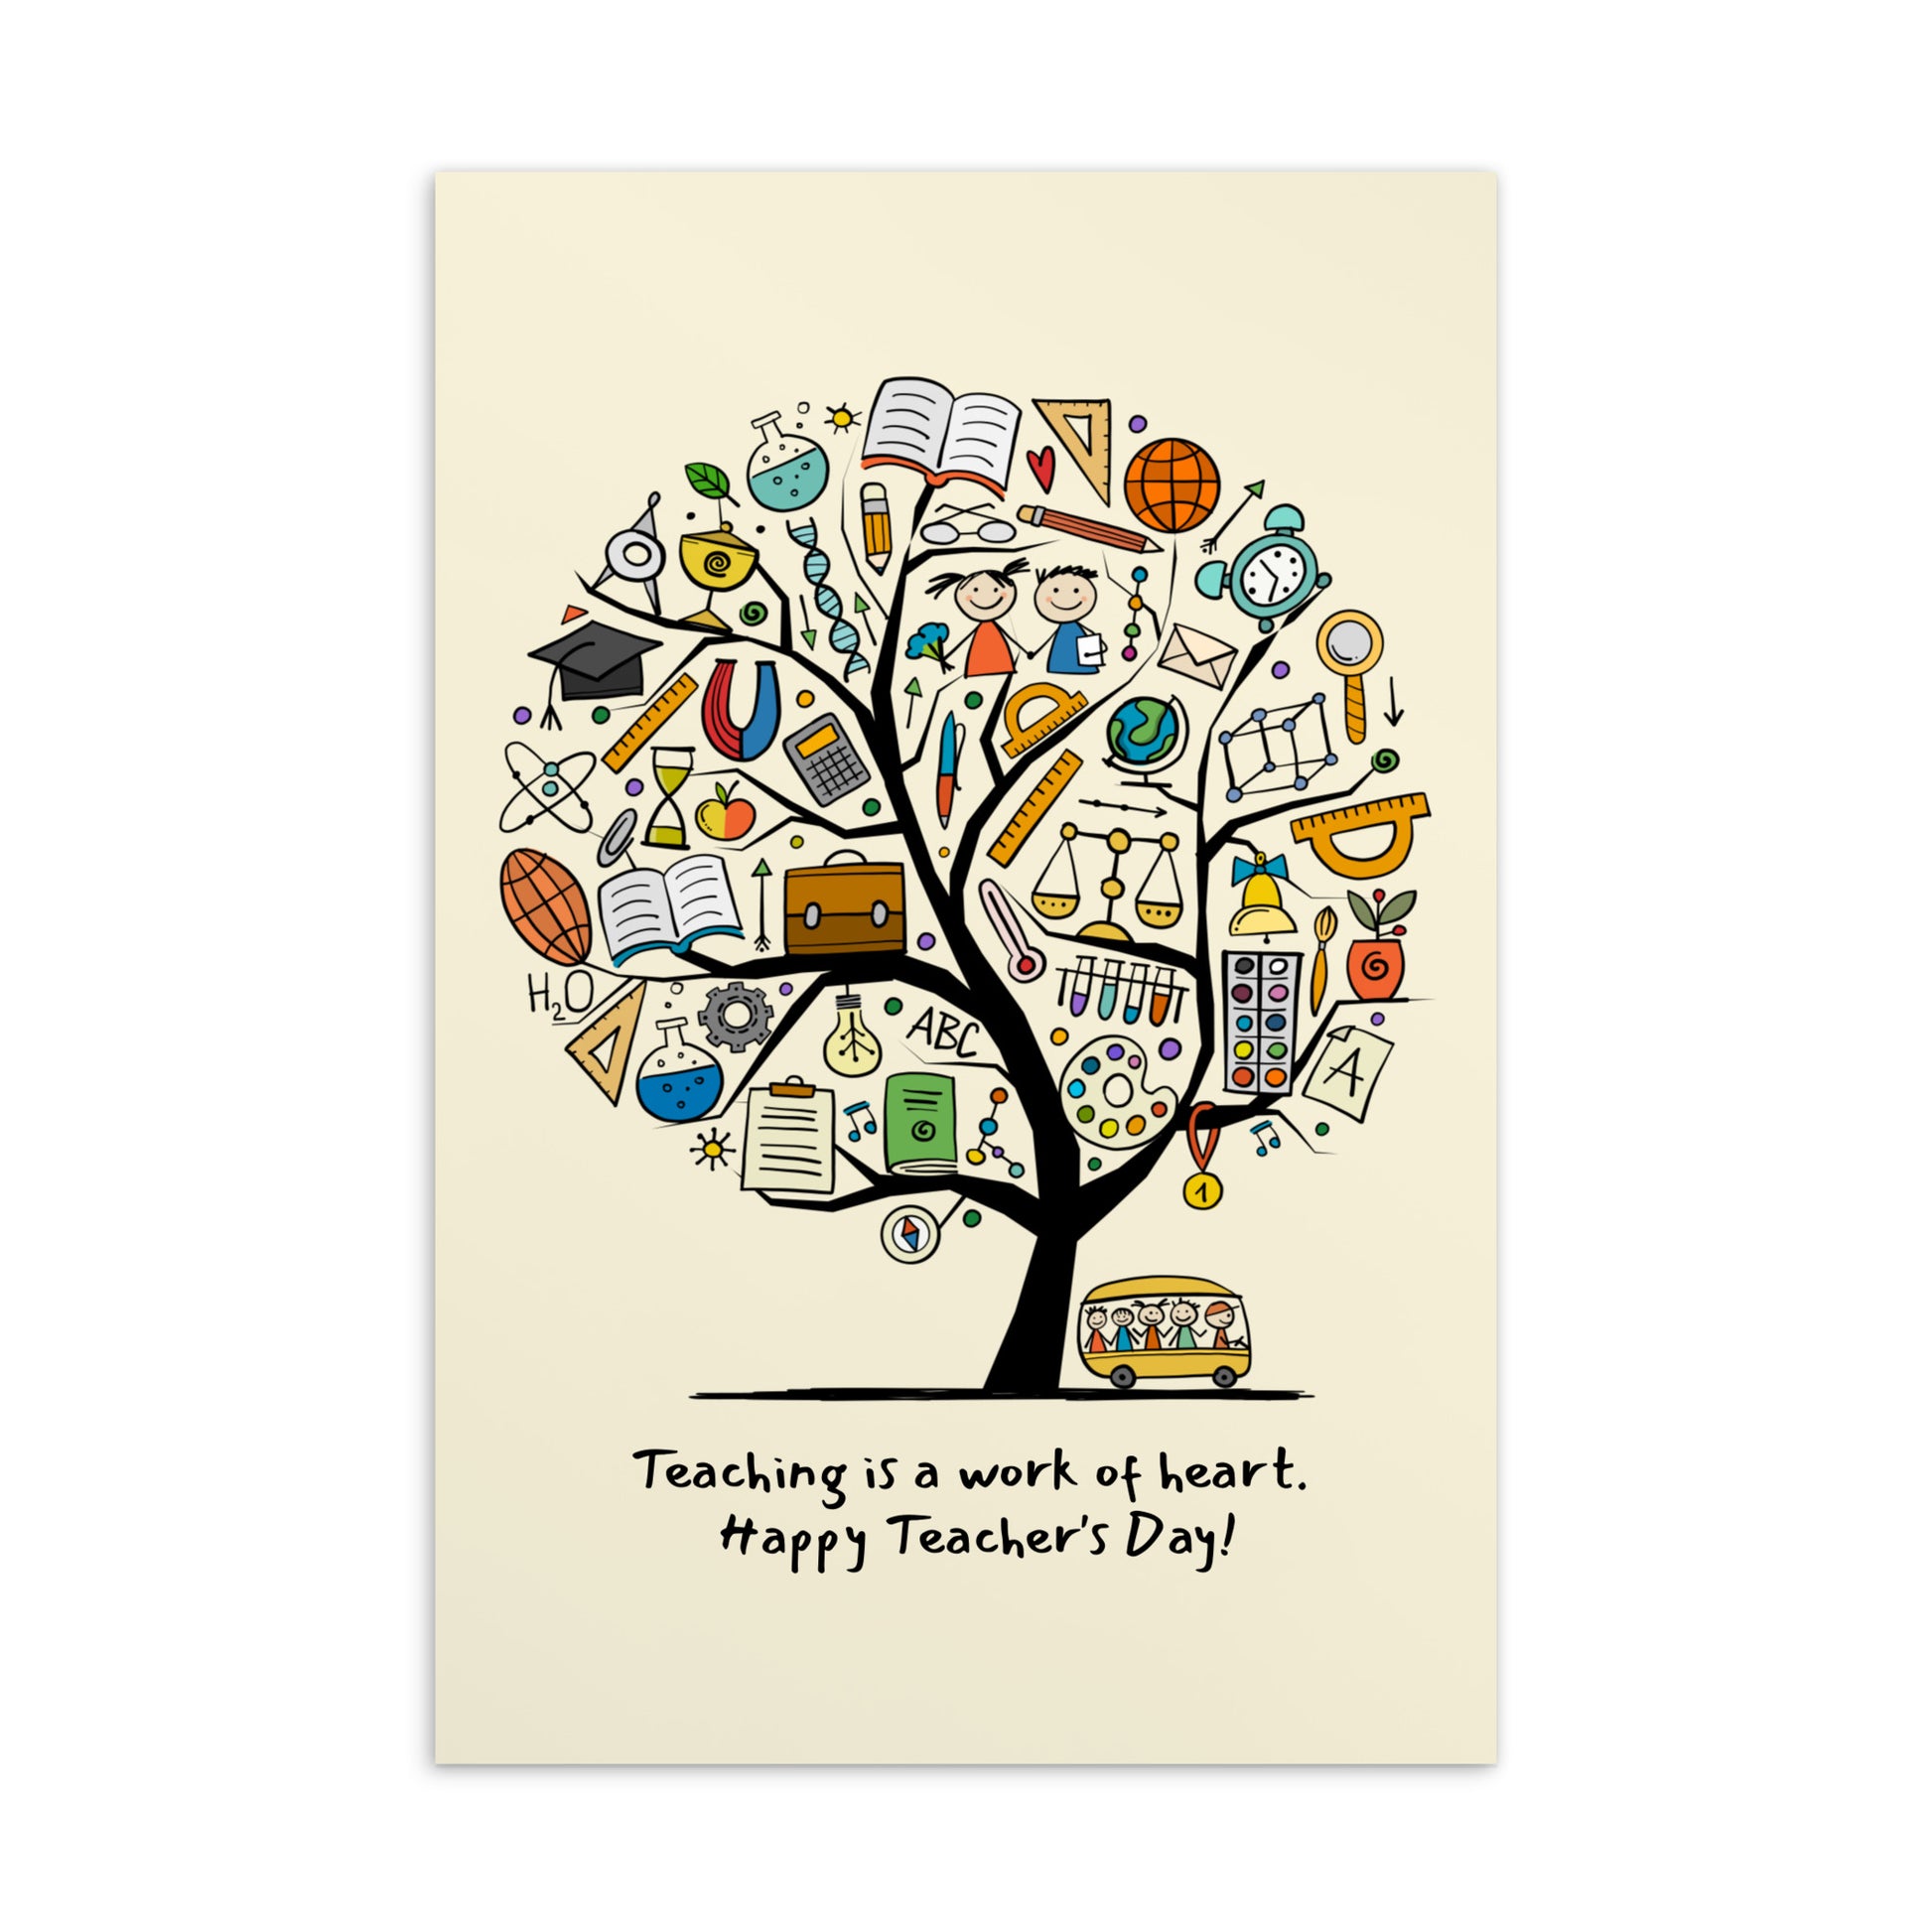 Personalized Postcard with Funny School Concept Tree Print kudrylab